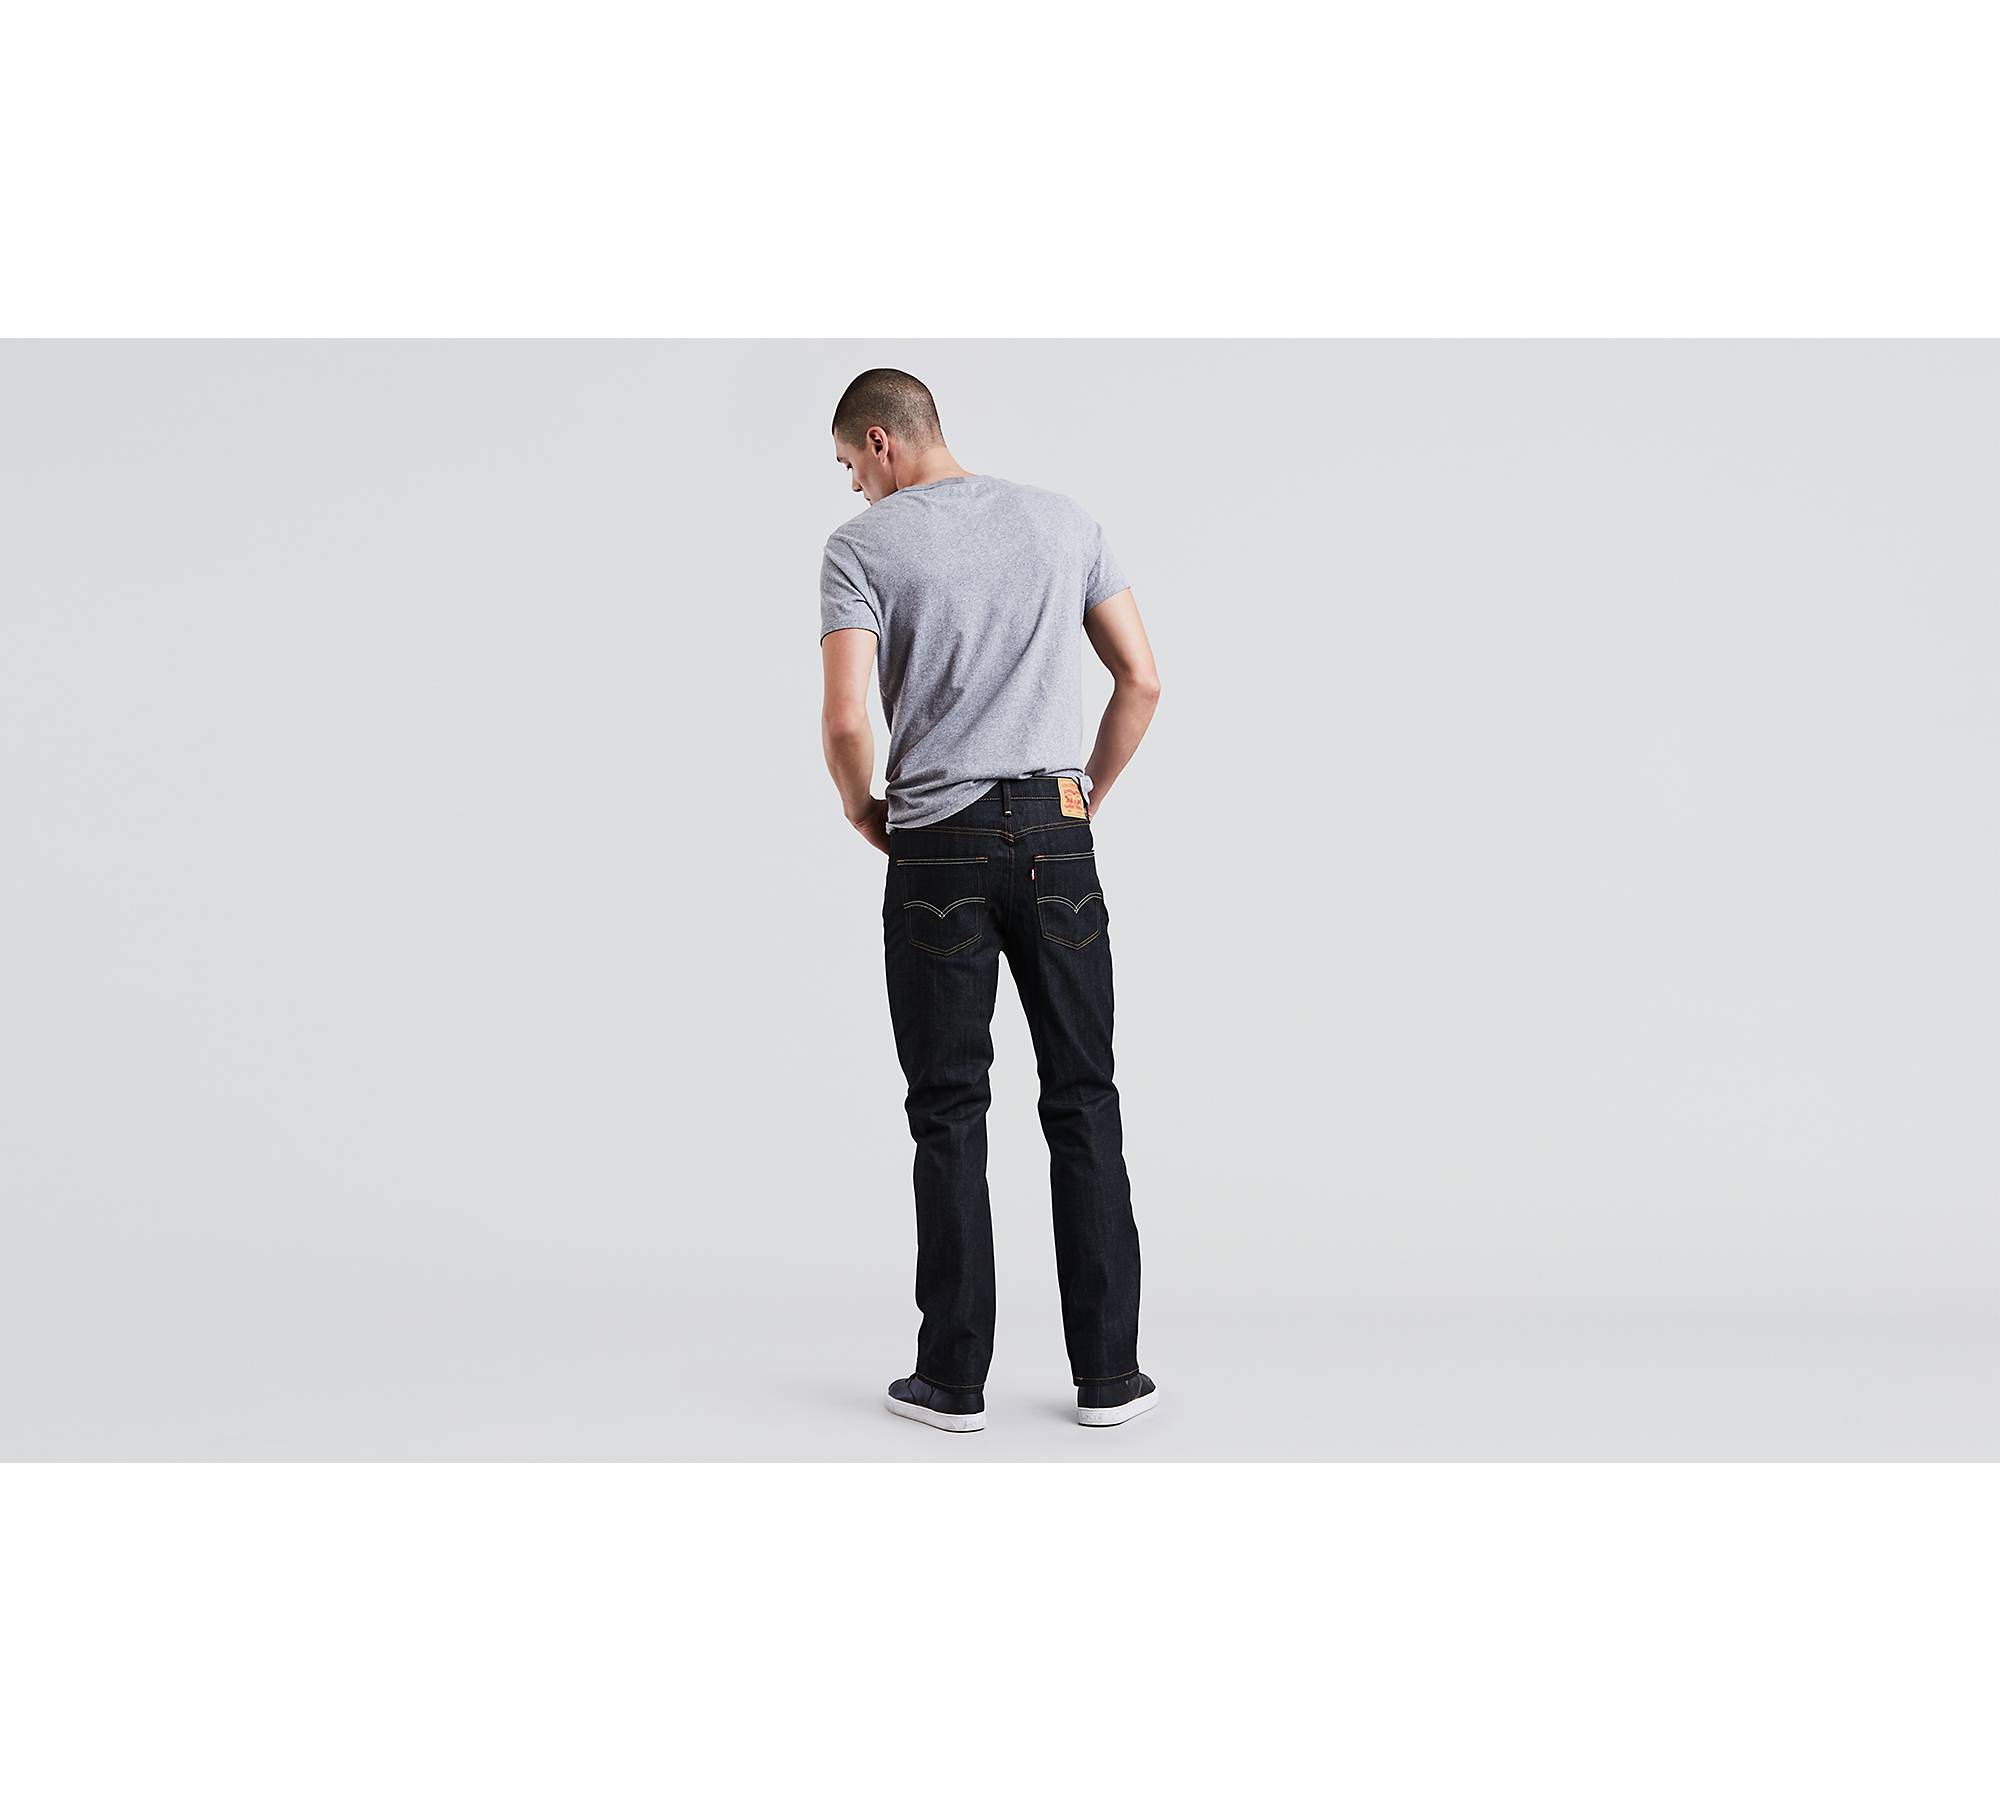 Mens Athletic fit Jeans, Athletic clothing